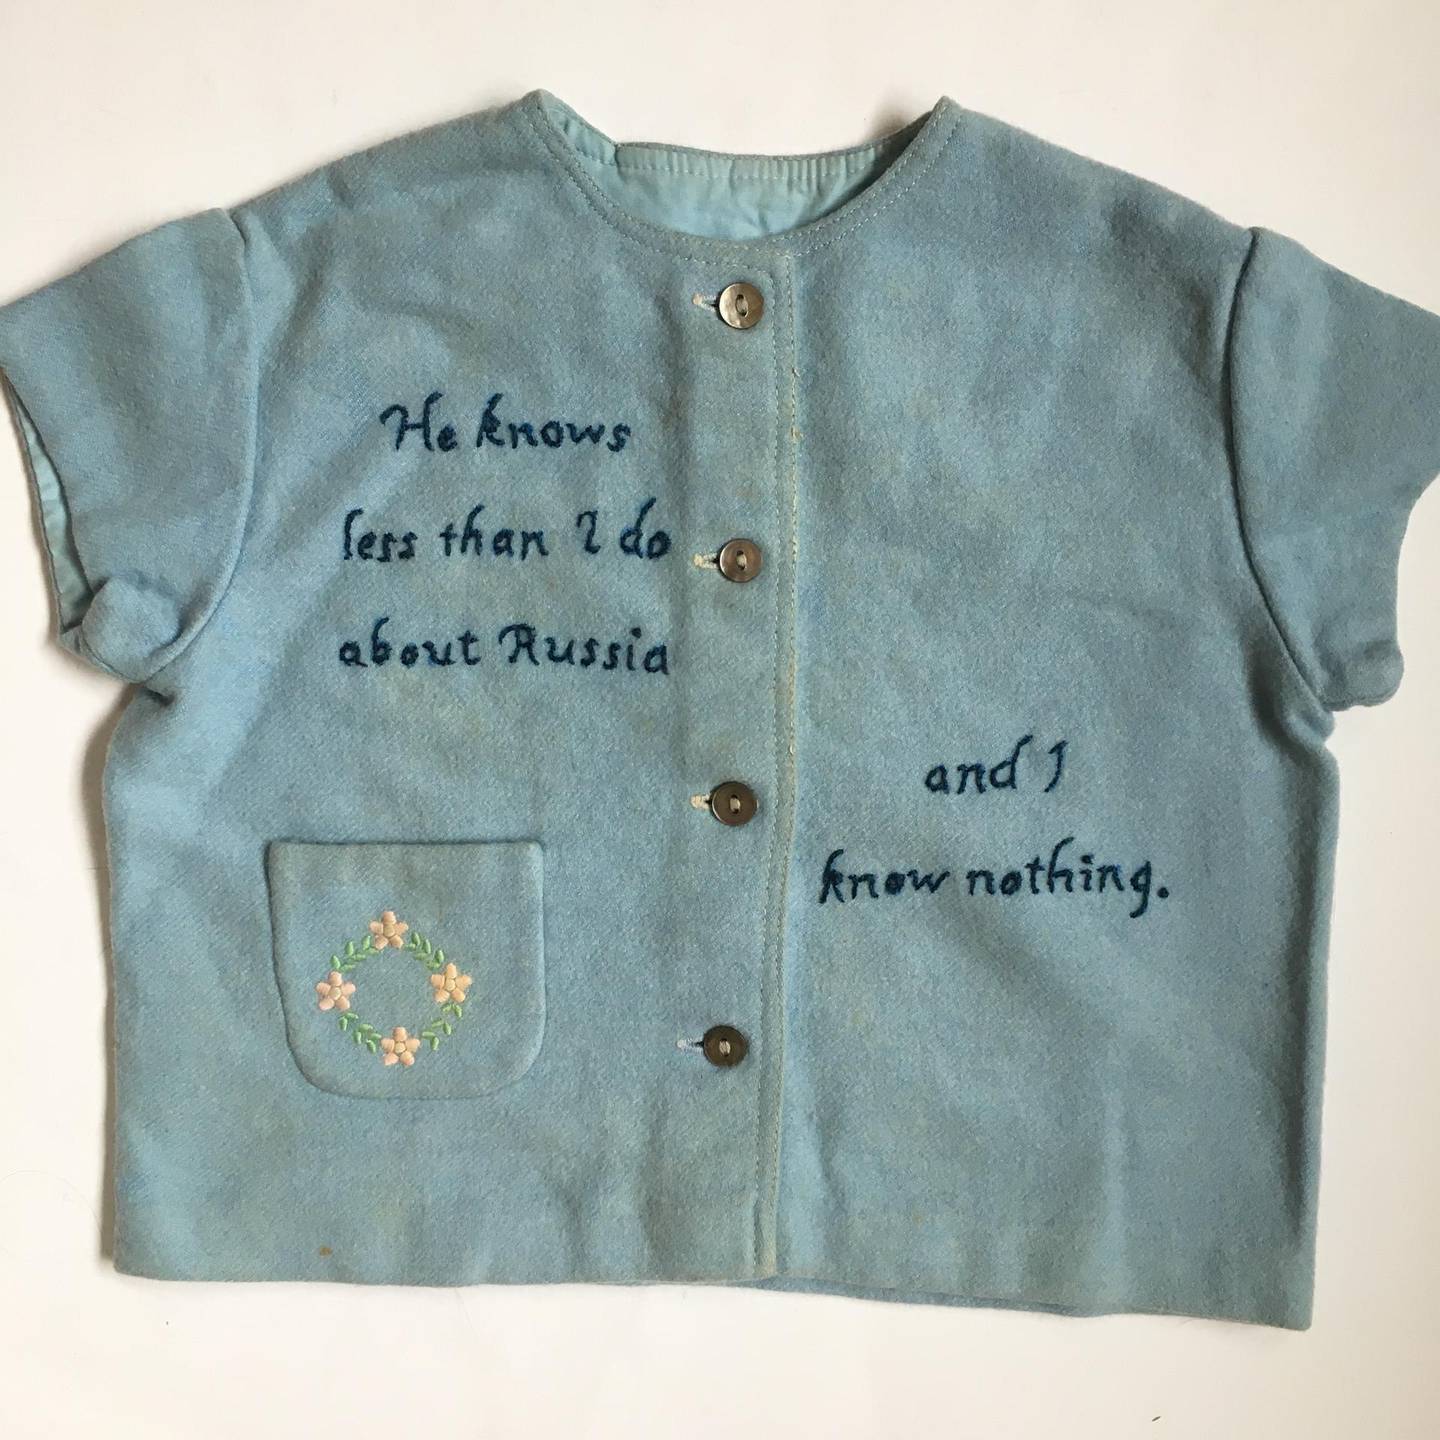 “[I] am very happy to offer [this piece] to the Tiny Pricks Project, which seems to me the right place to speak out against war," says Janet Burroway. Her son was a soldier who served in the 2003 Iraq War and took his own life after coming back to the US. Burroway has used his old baby clothes to create the piece for the project. Courtesy Tiny Pricks Project